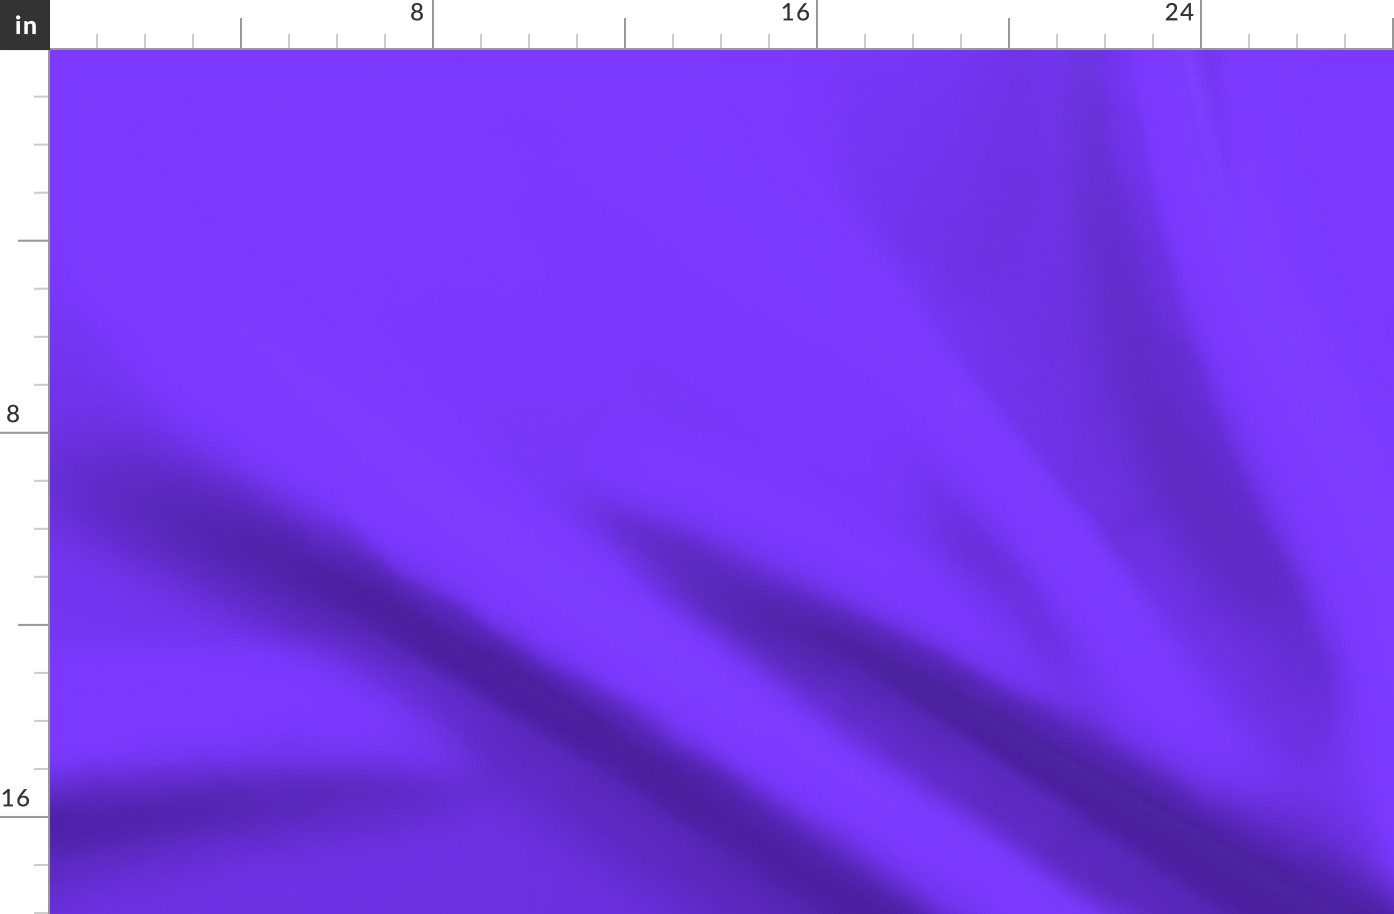 Purple, Solid, Neon, Electric, Periwinkle, Solid Fabric, Solid Purple